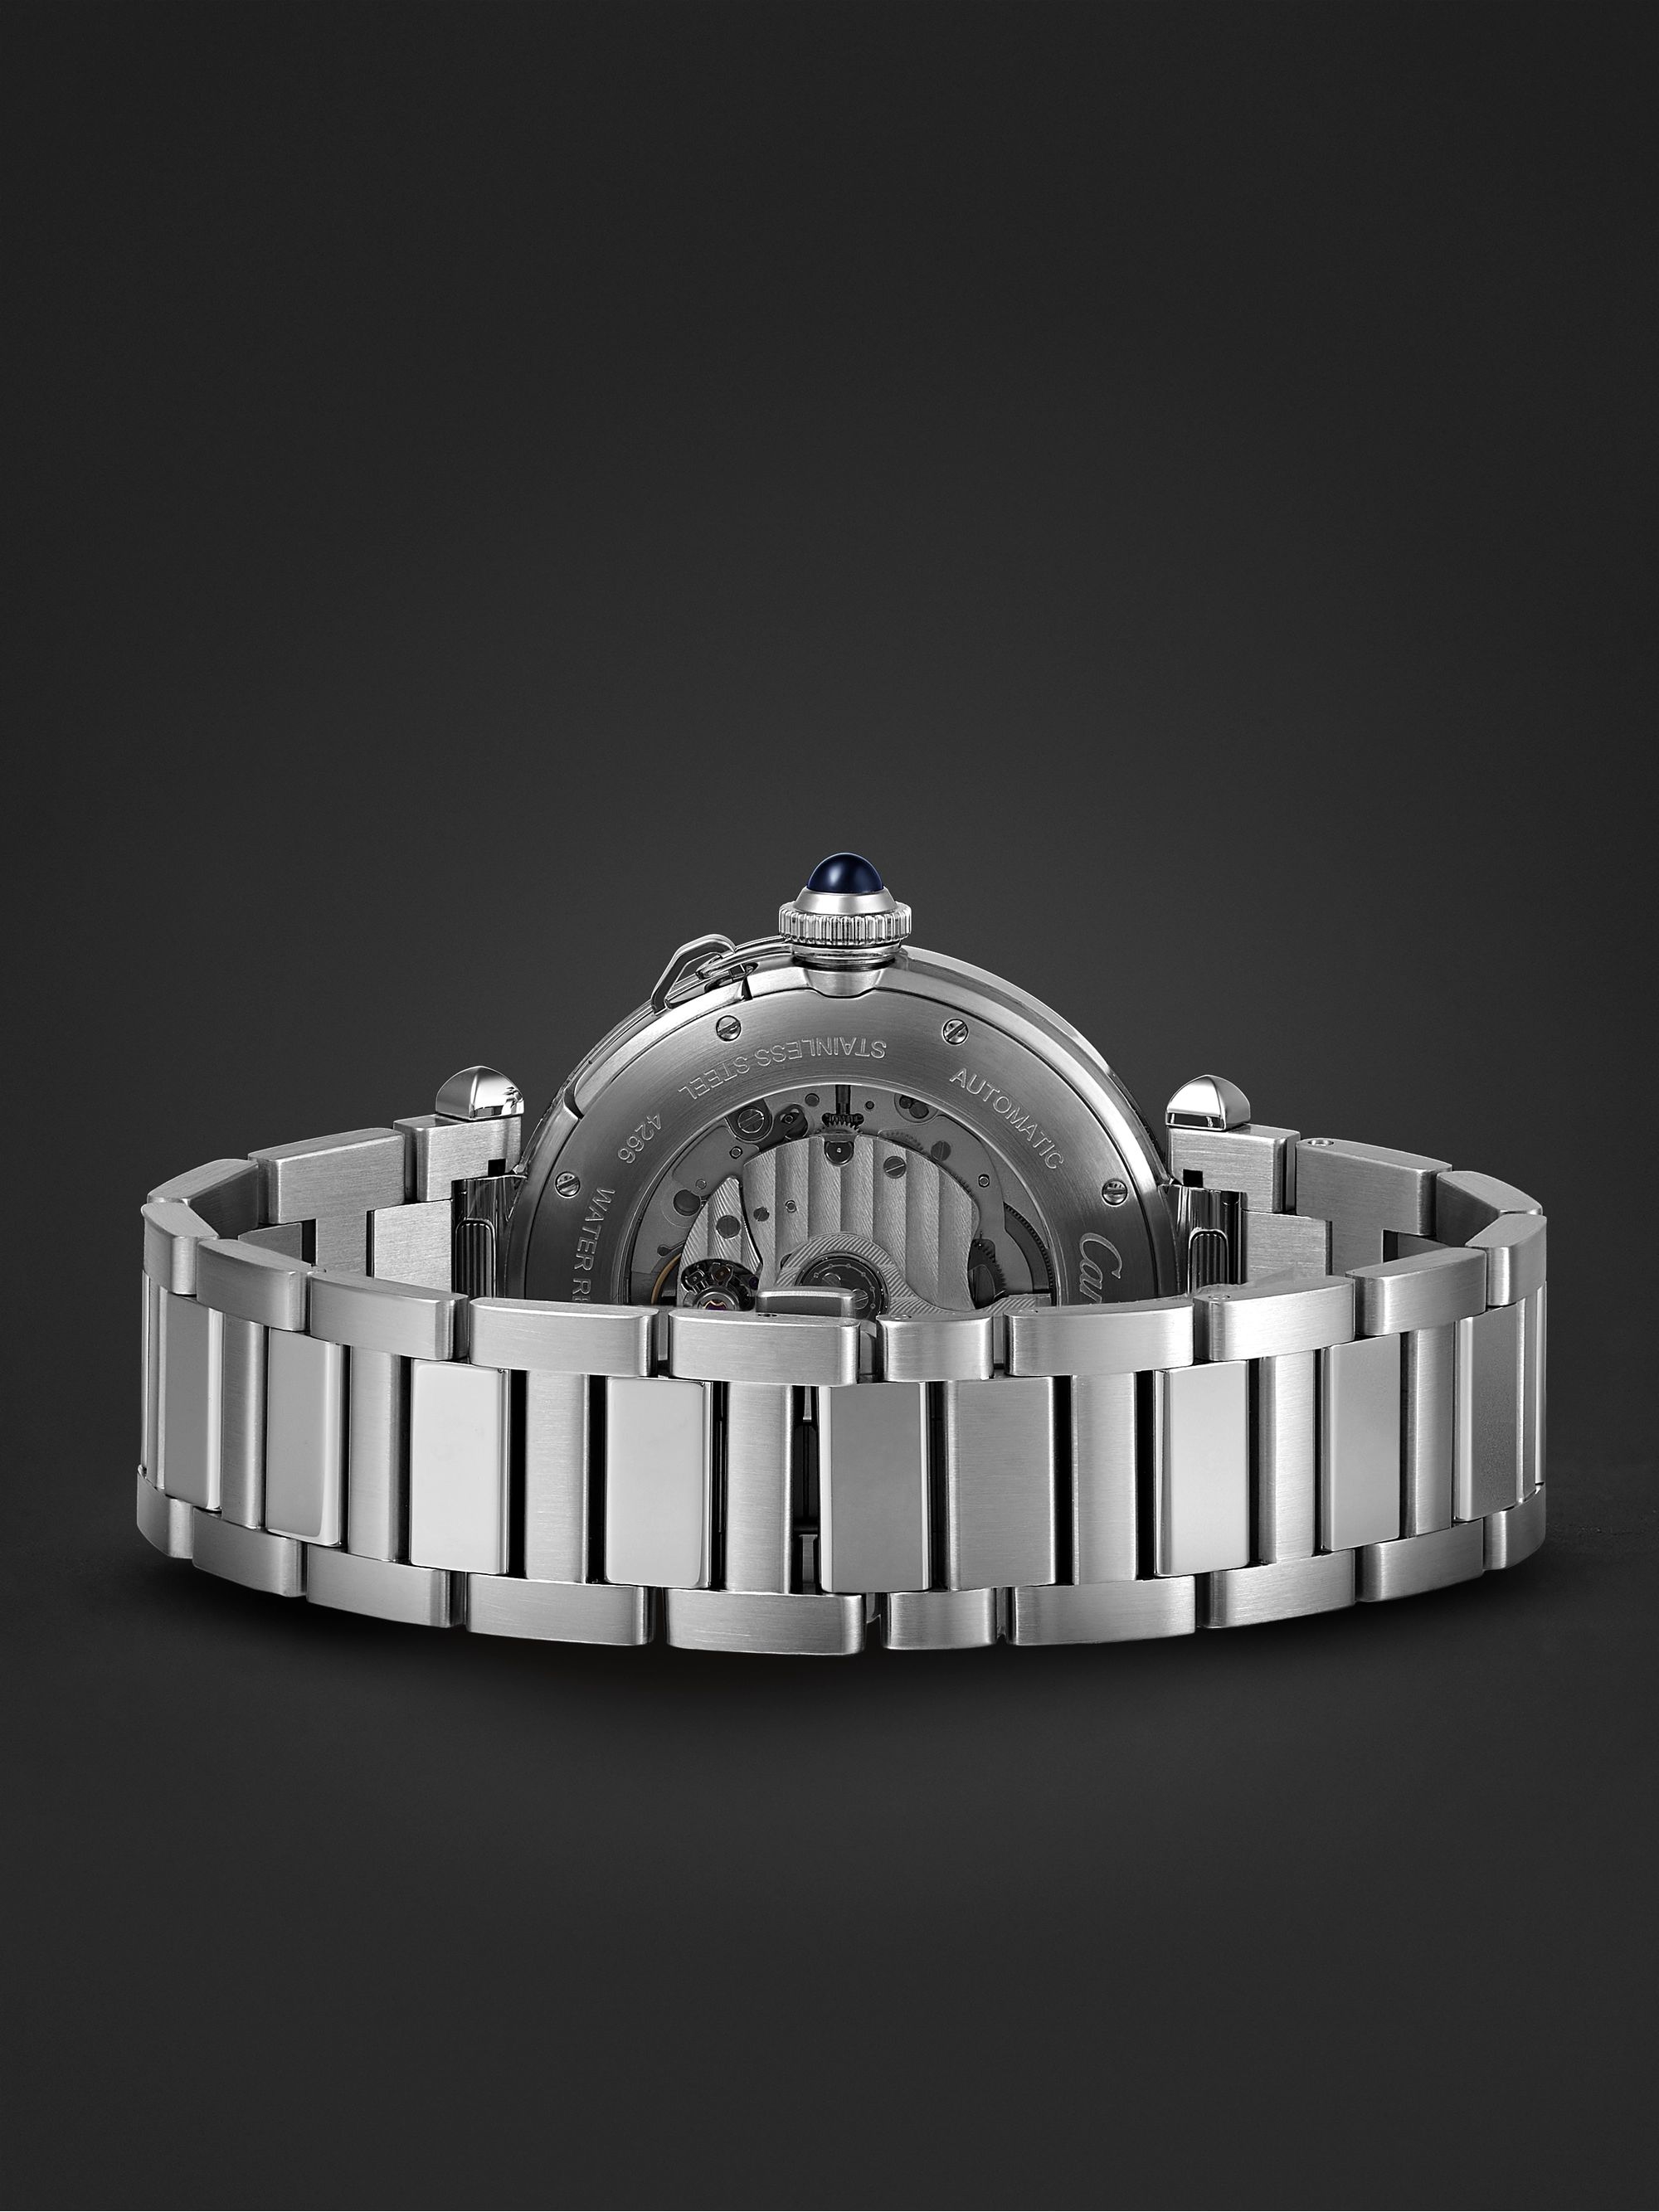 CARTIER Pasha de Cartier Automatic 41mm Stainless Steel and Alligator Watch, Ref. No. WSPA0026